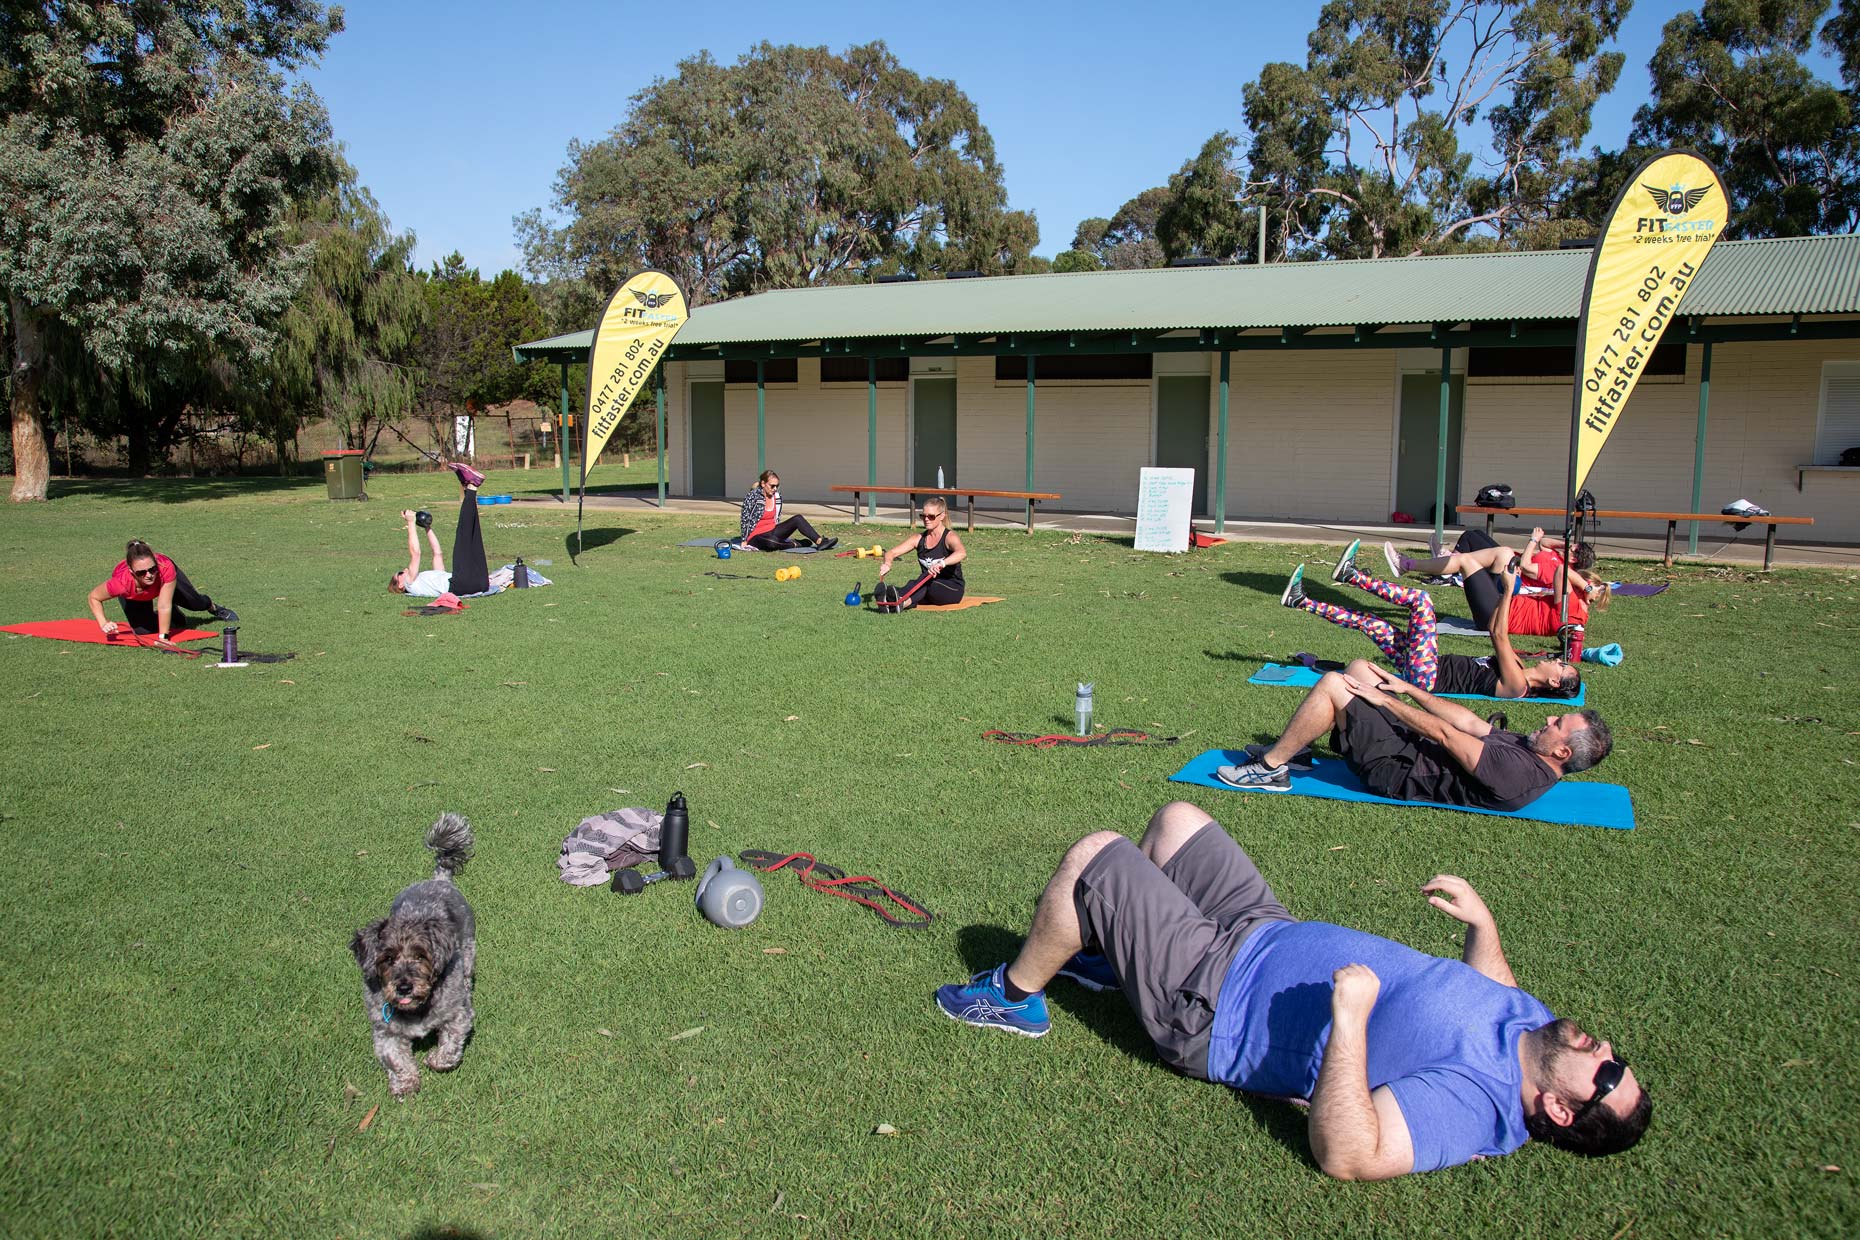 Personal-Trainer_Ingird_Kay recommences her personal training group (maximum 10 people) as Perth emerges from COVID_19 lockdown